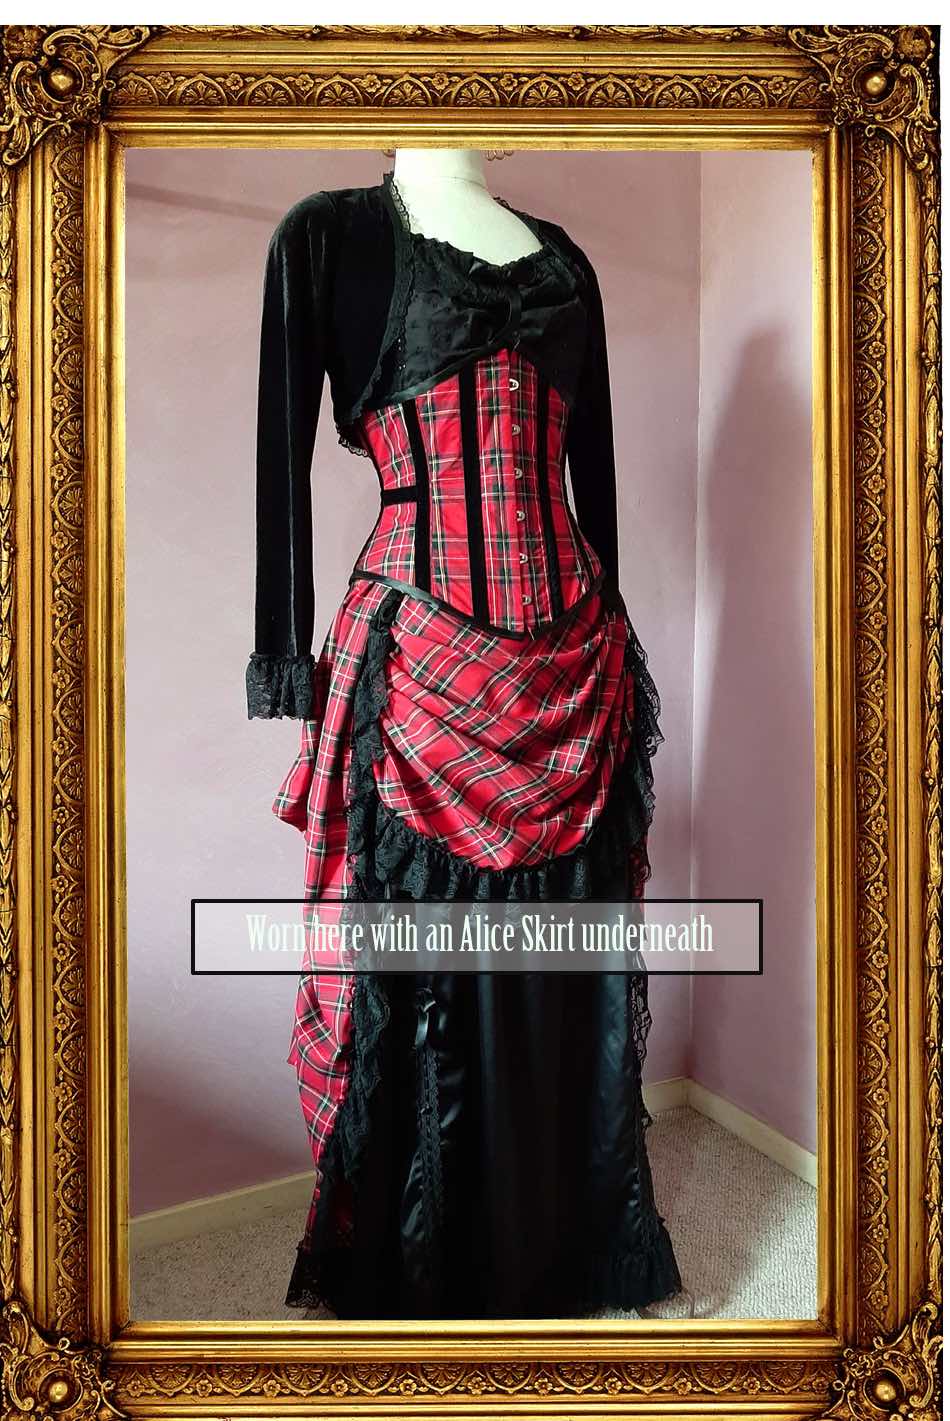 side front view showing option of wearing the Alice in Wonderland skirt as an underskirt with the red stewart tartan victorian bustle skirt and matching corset